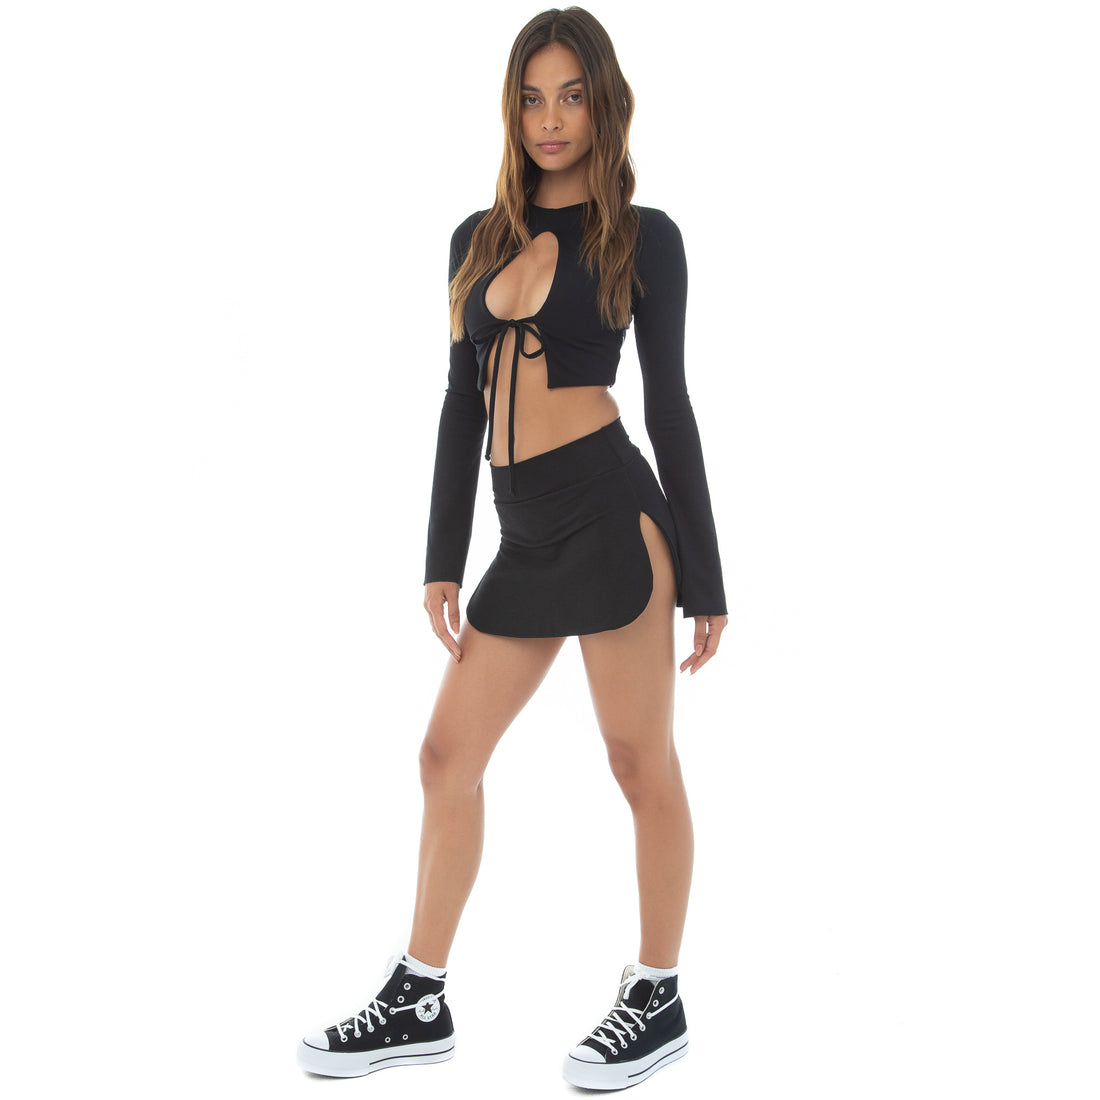 Are You Am I - Kye Skirt **black